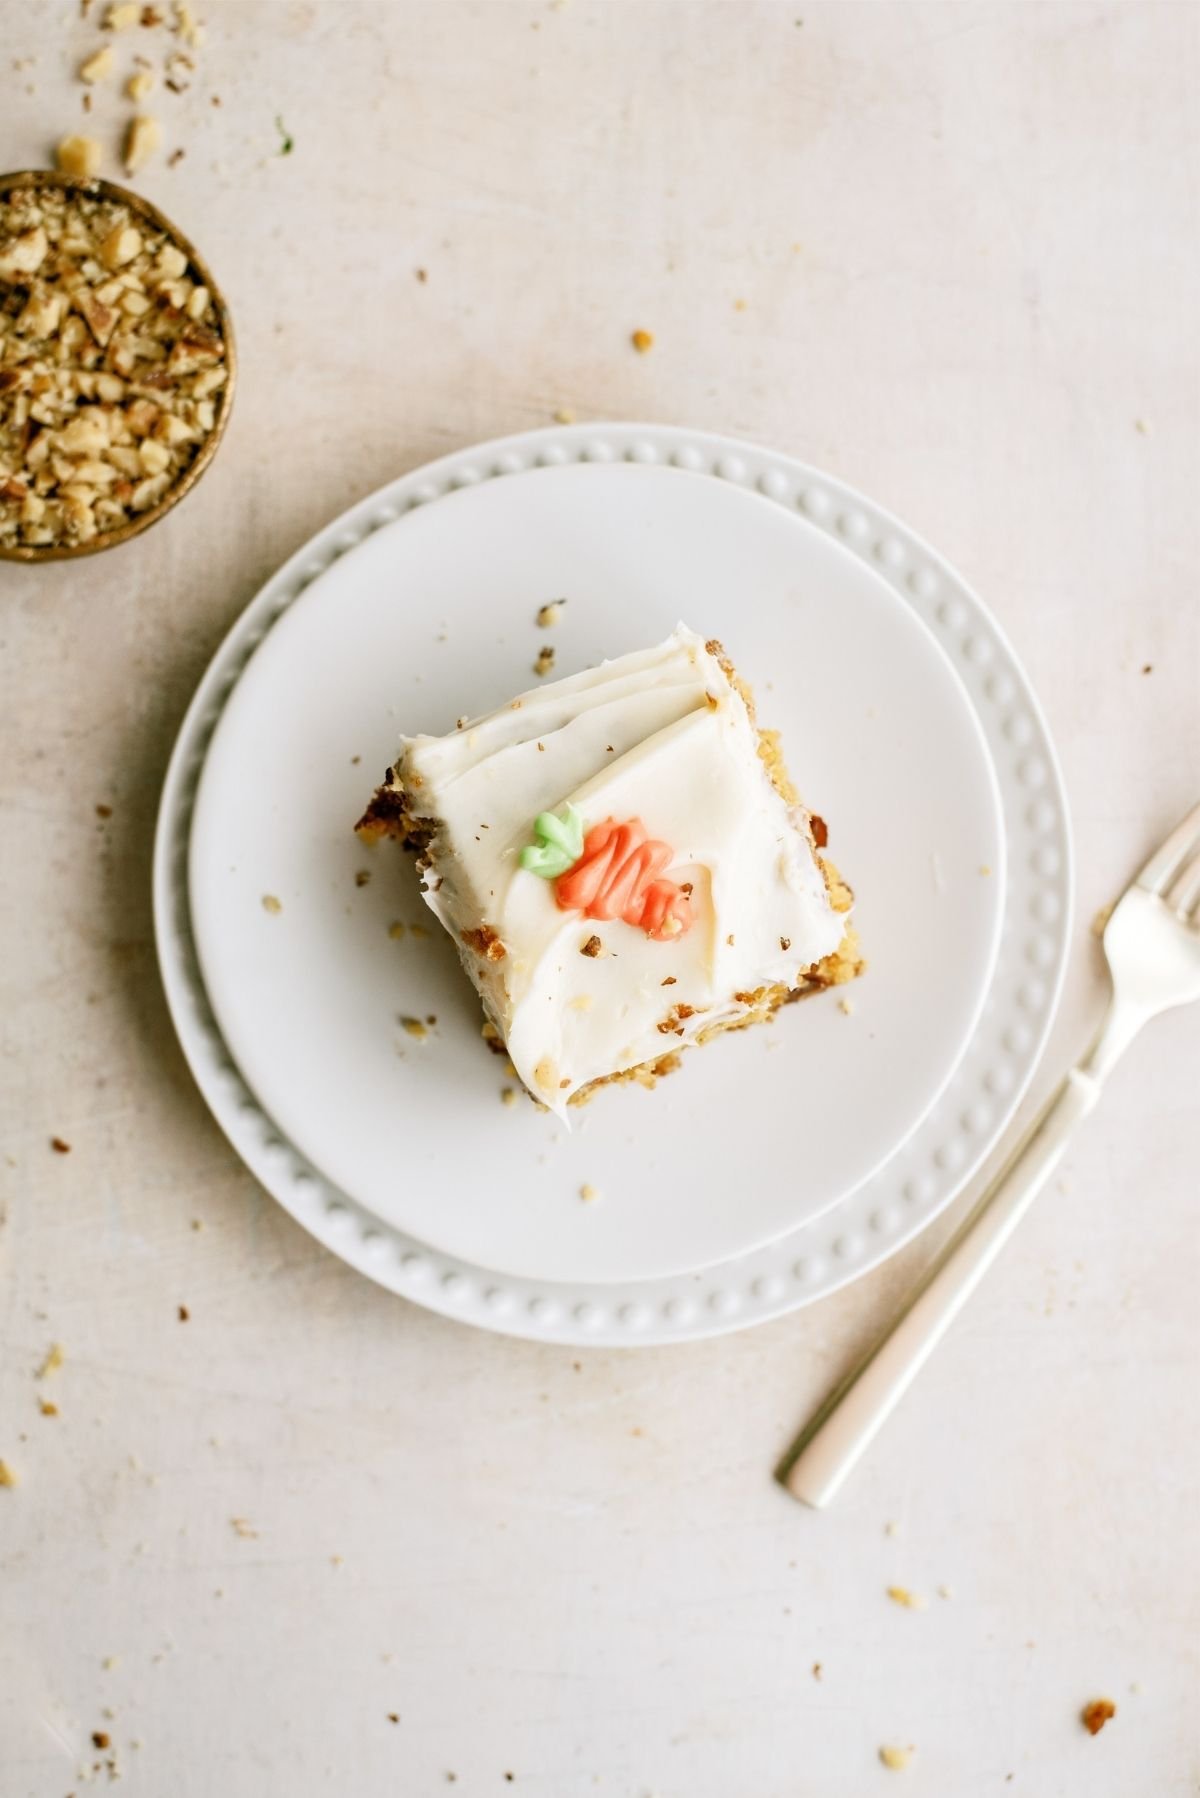 Slice of Best Carrot Cake on a plate with a fork